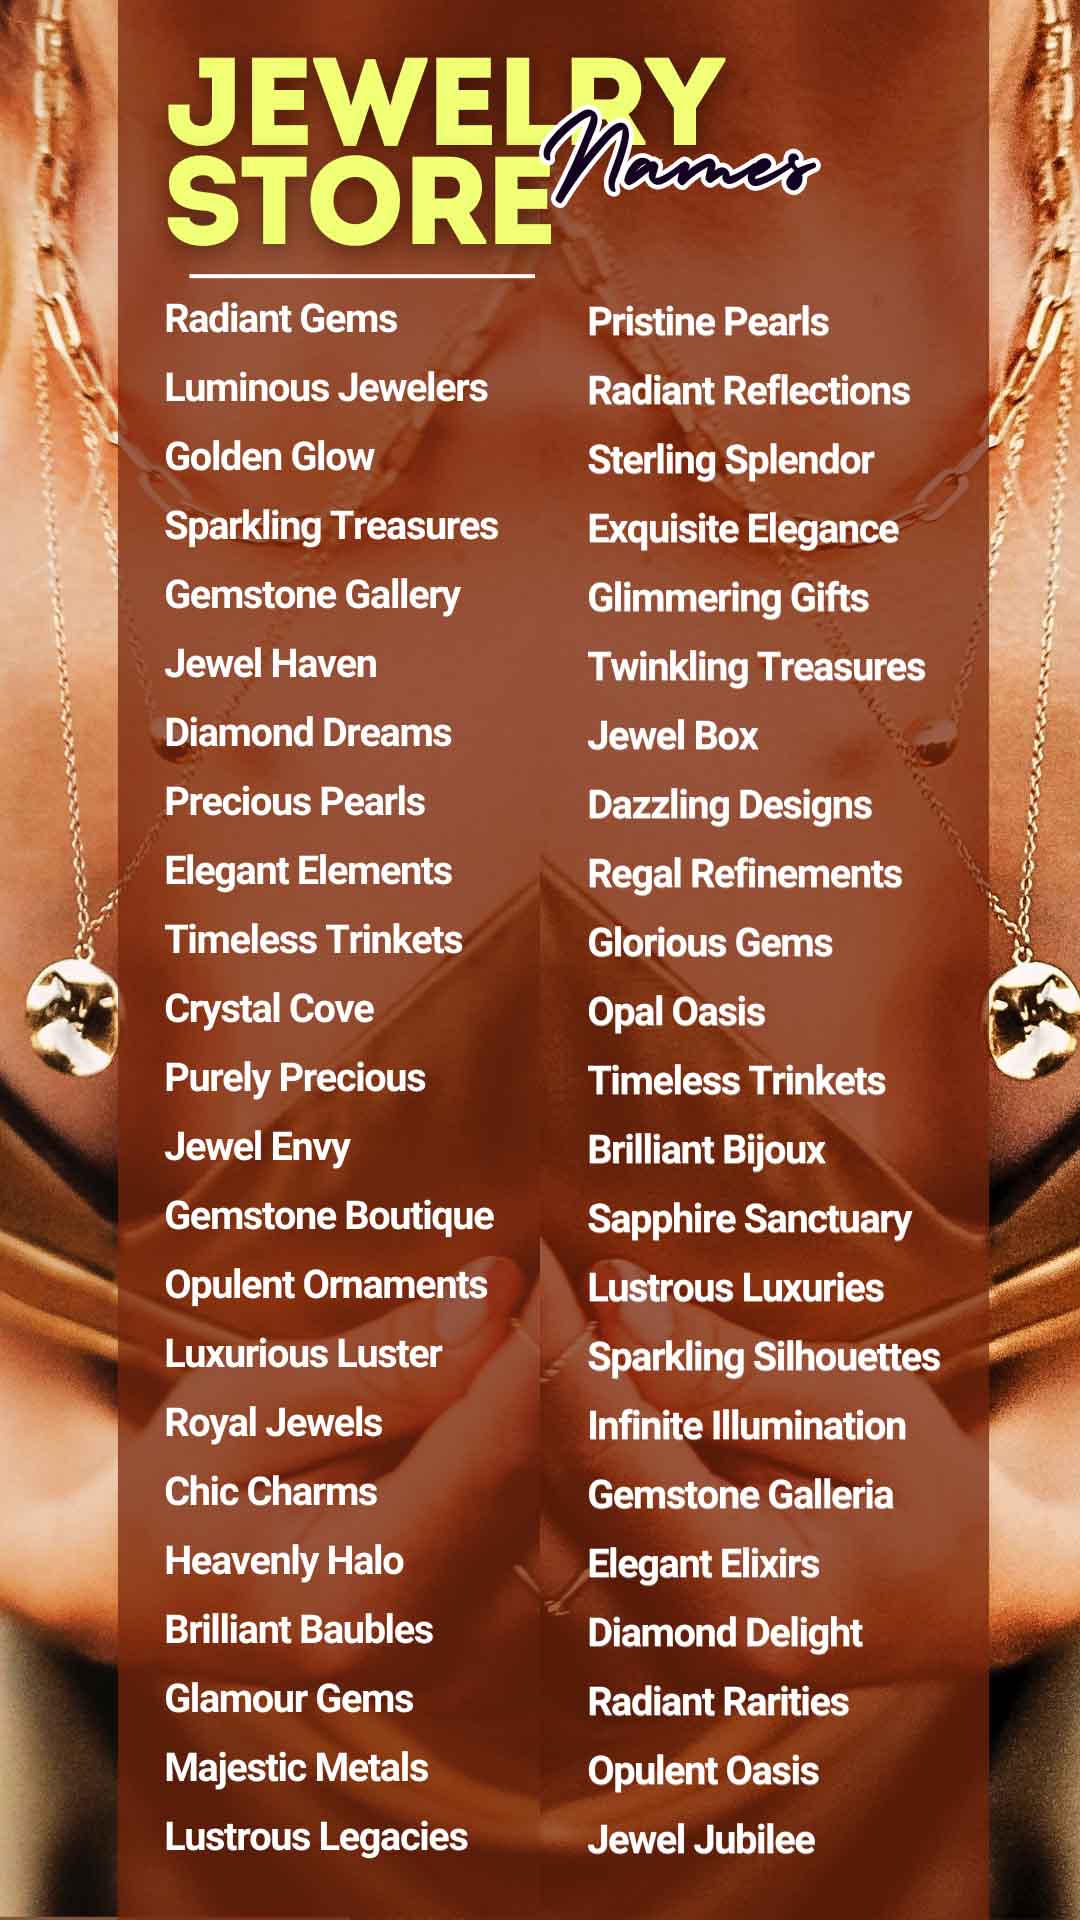 List of Jewelry Store Name Ideas